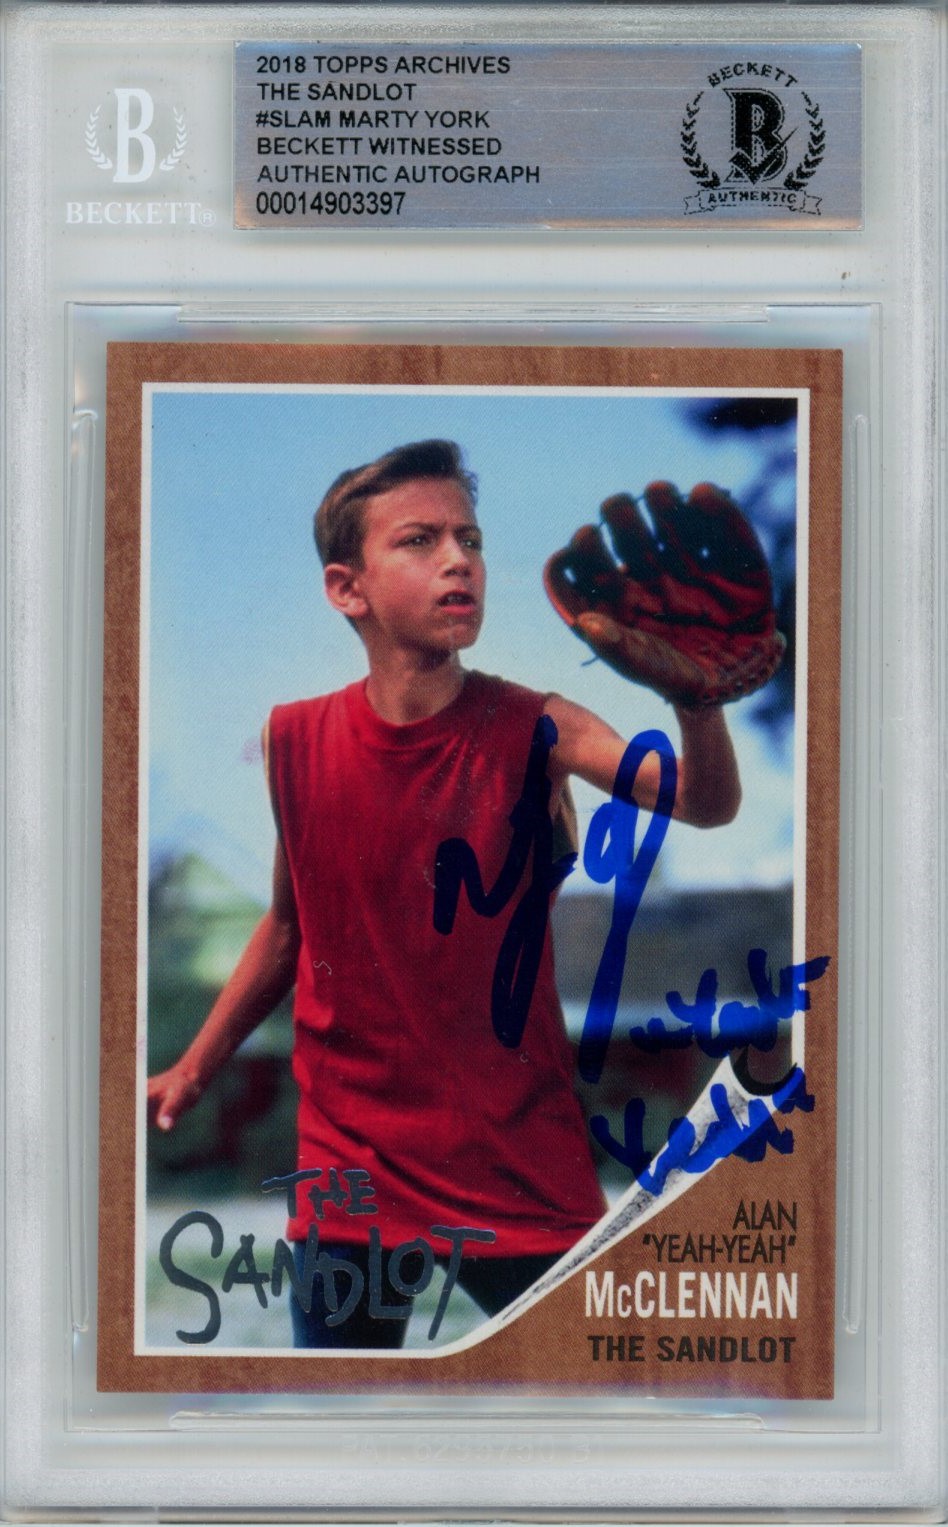 Marty York Signed The Sandlot 2018 Topps Archive Beckett Auto 10